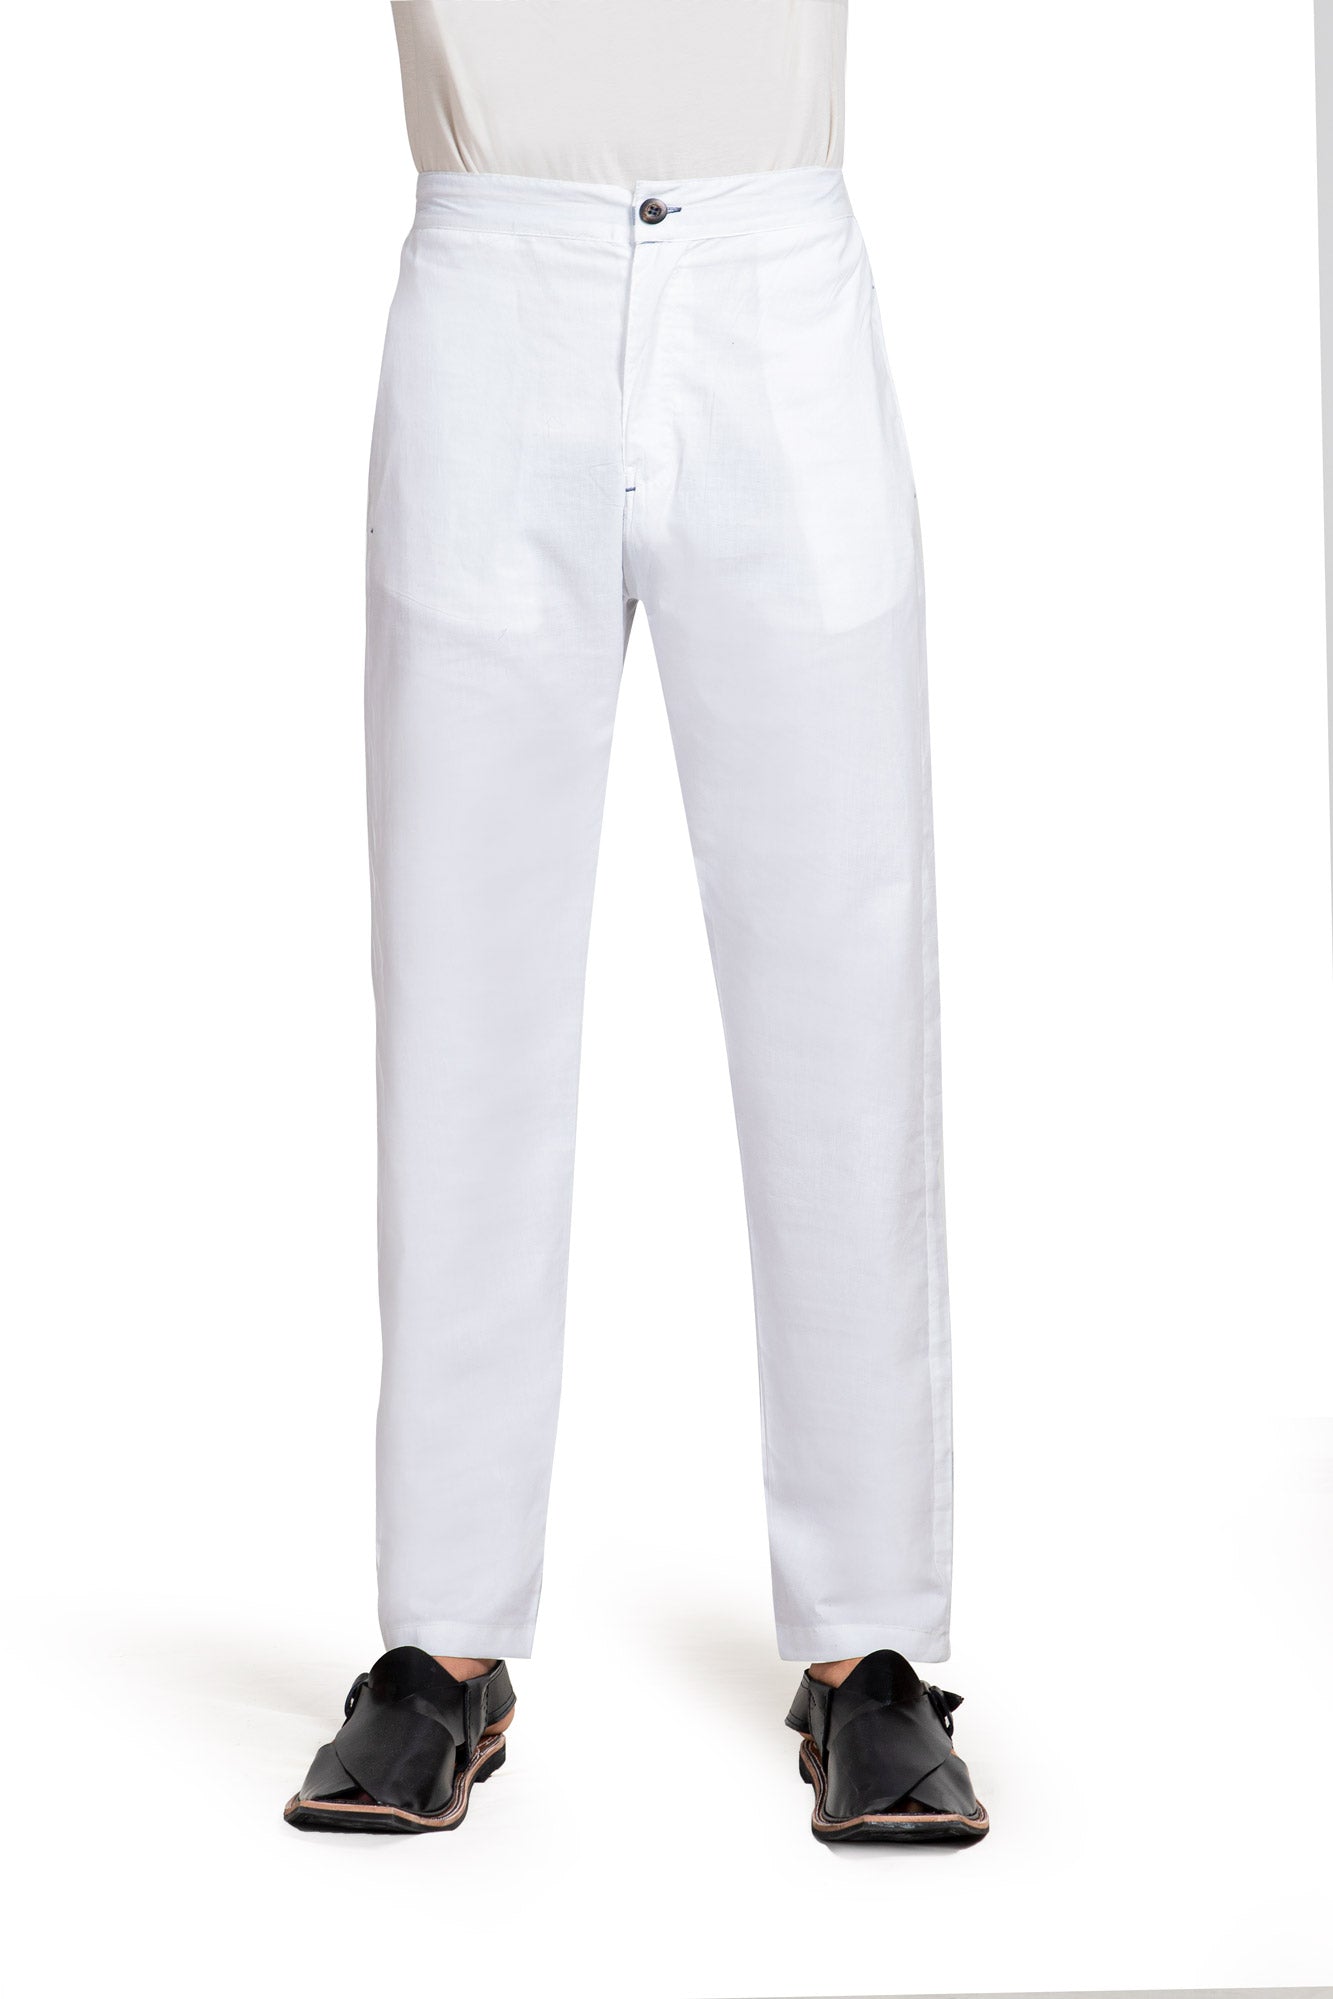 Essential White Trousers